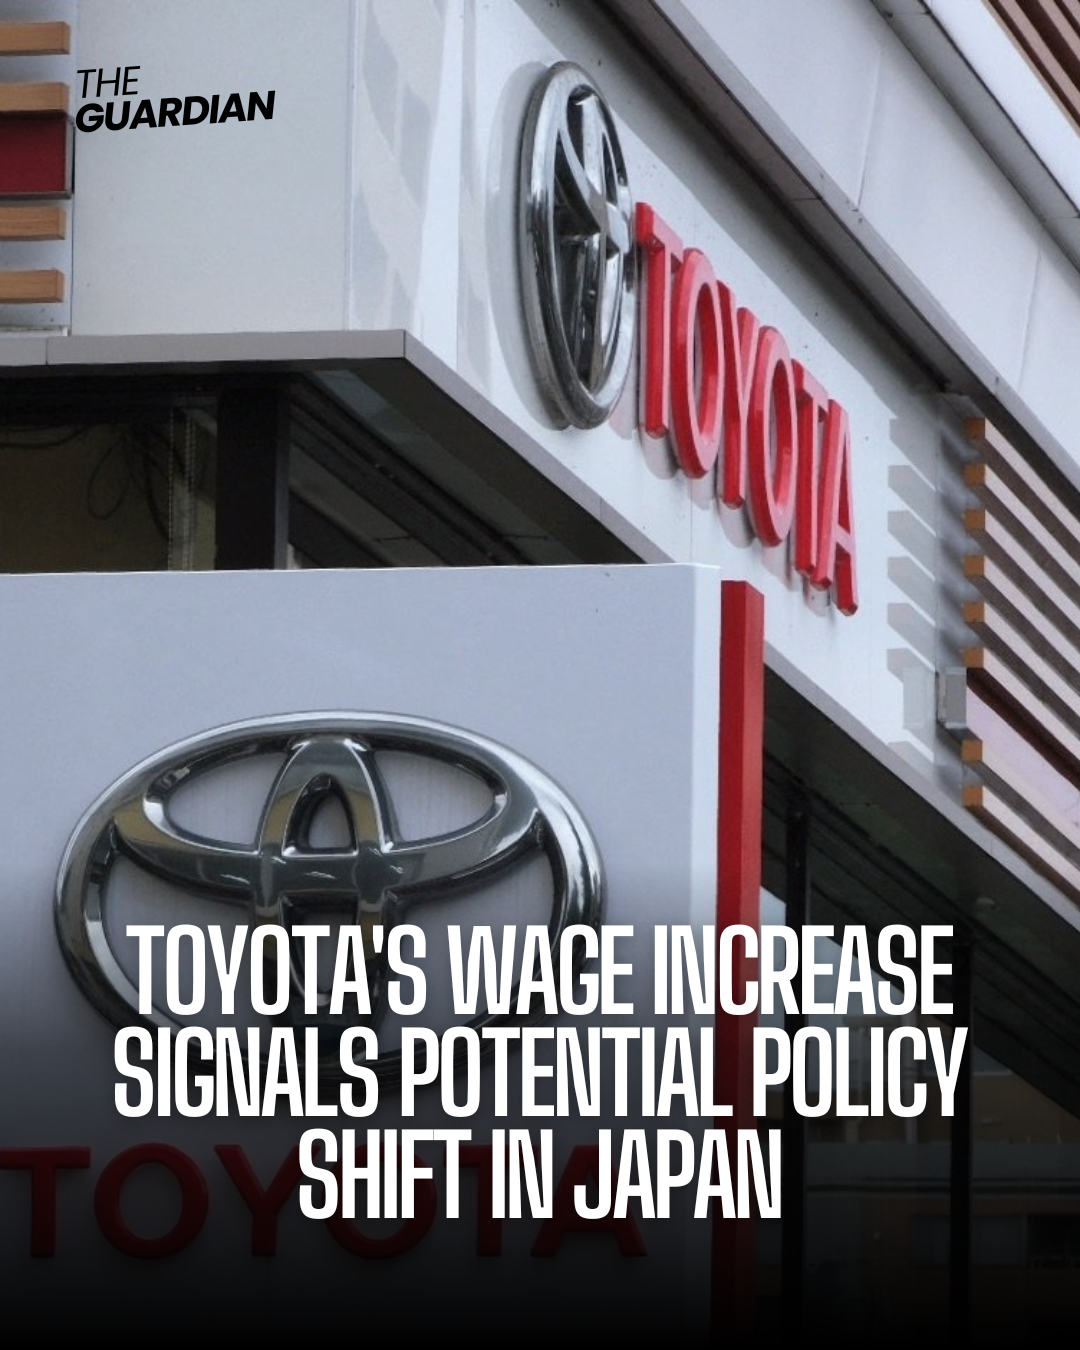 Toyota Motor's decision to give its plant workers the biggest pay rise in 25 years marks a potential shift in Japan's economic environment.